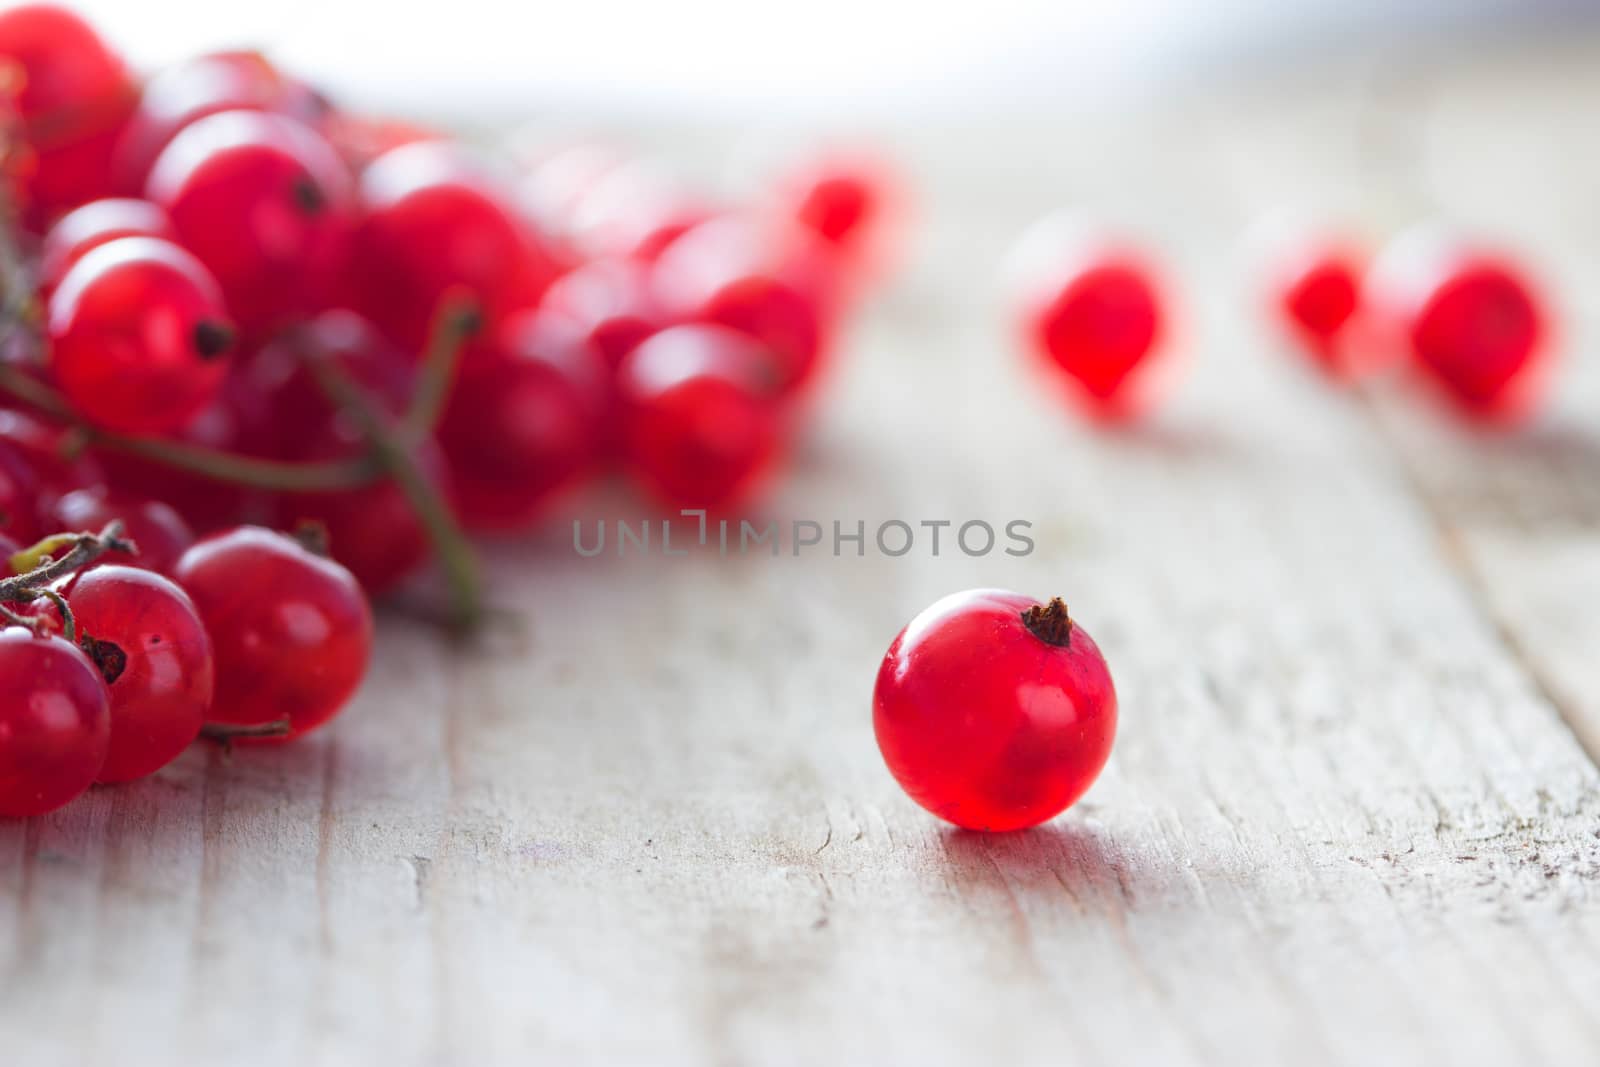 Red currants on wooden table. close up toned